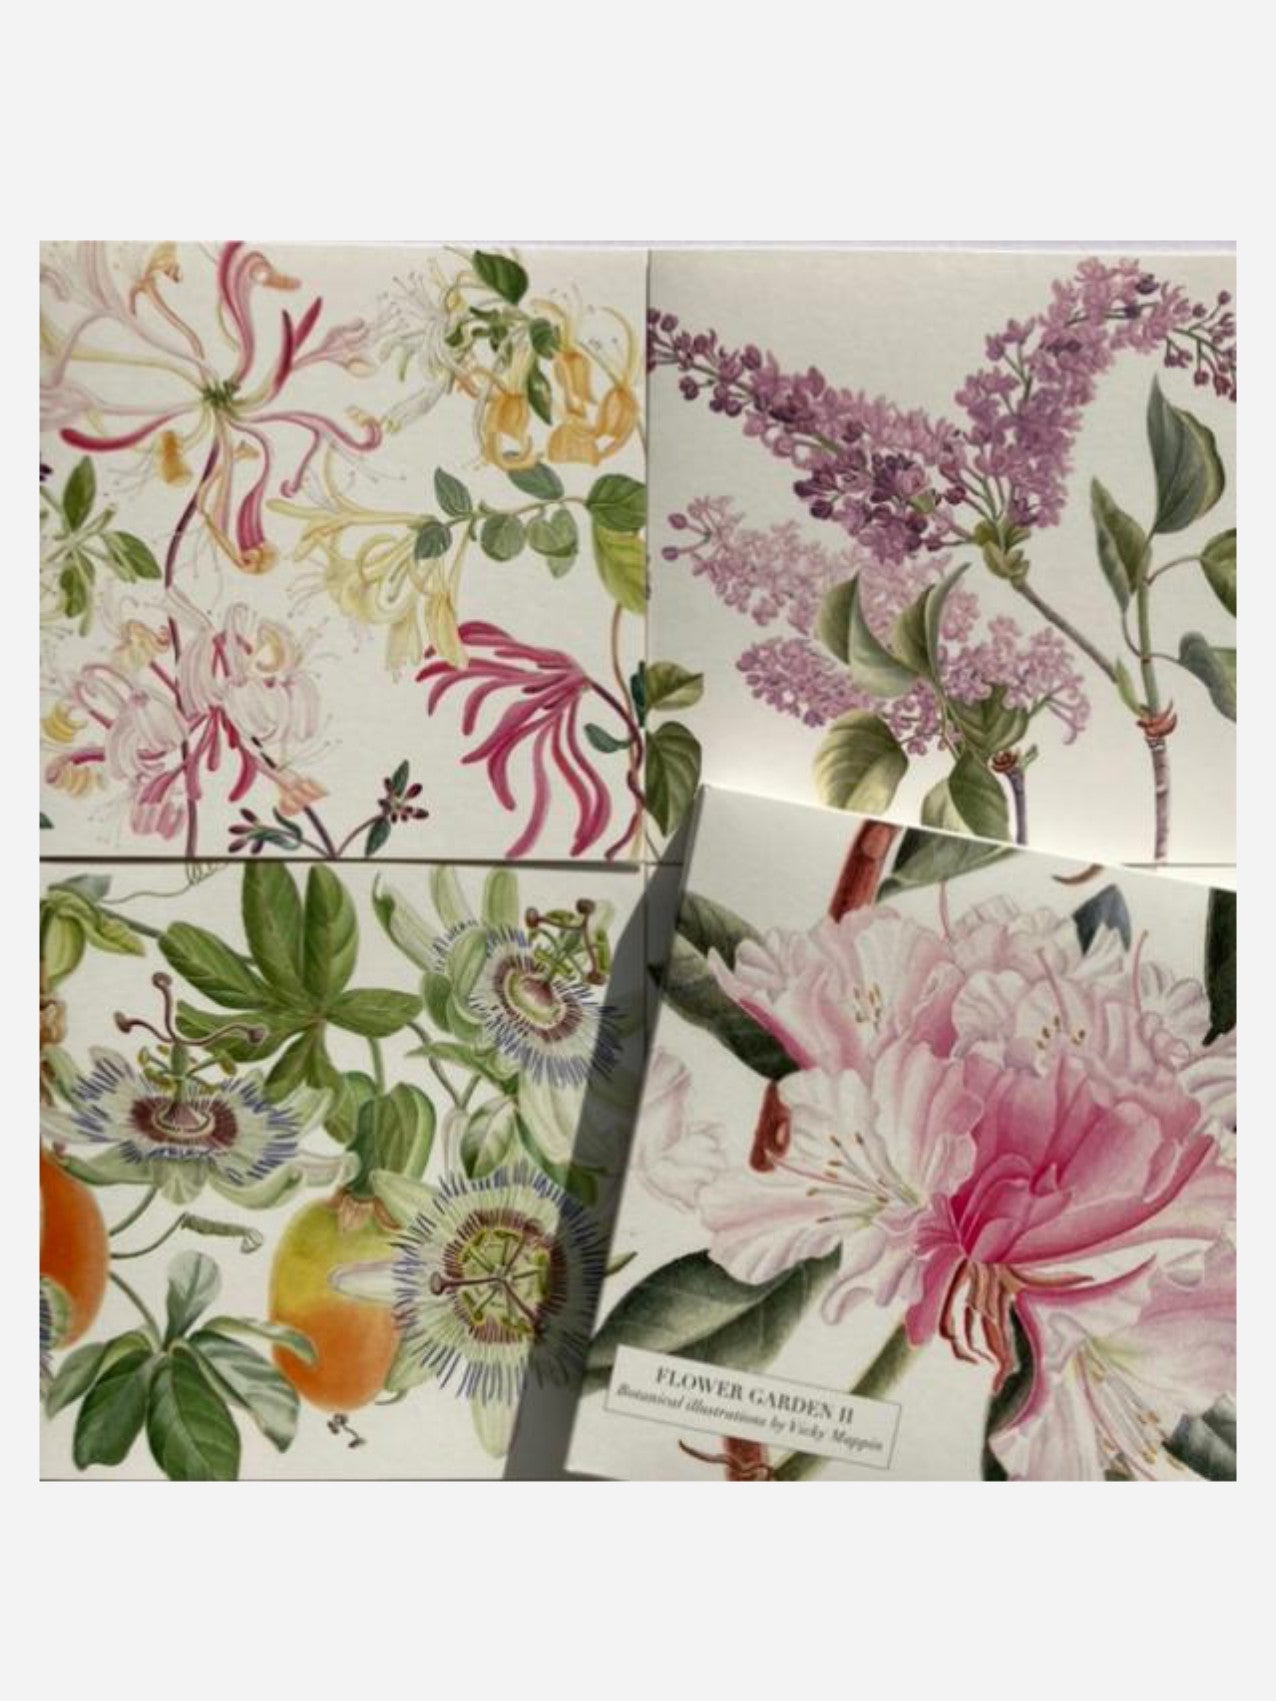 Flower Garden Cards - Rhododendron Cover